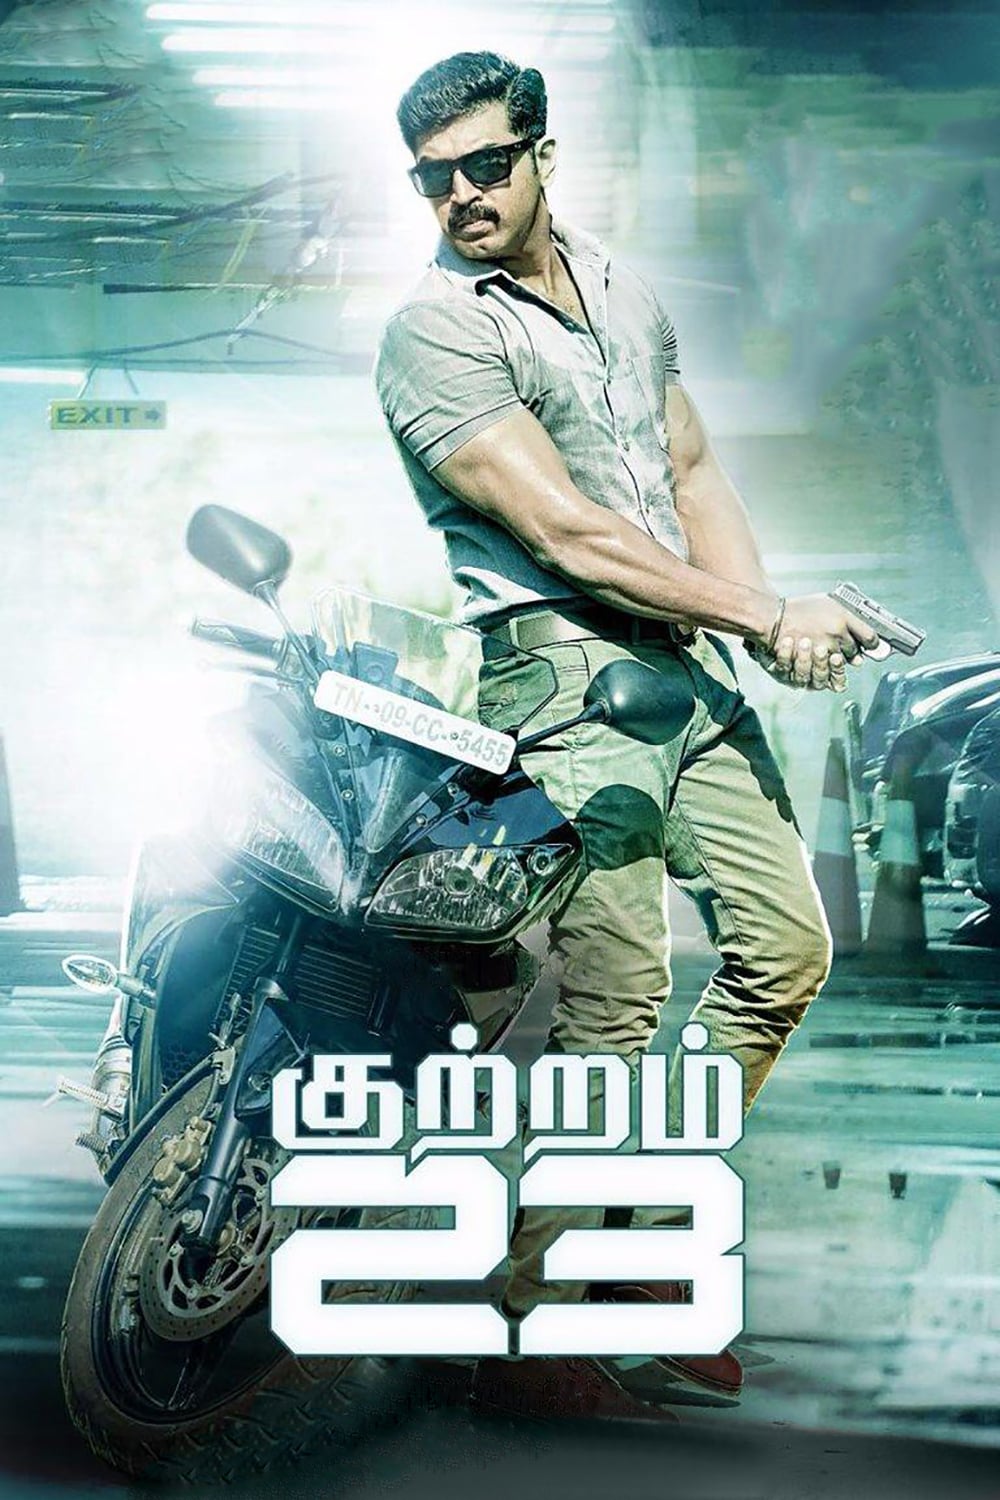 Poster for the movie "Kuttram 23"